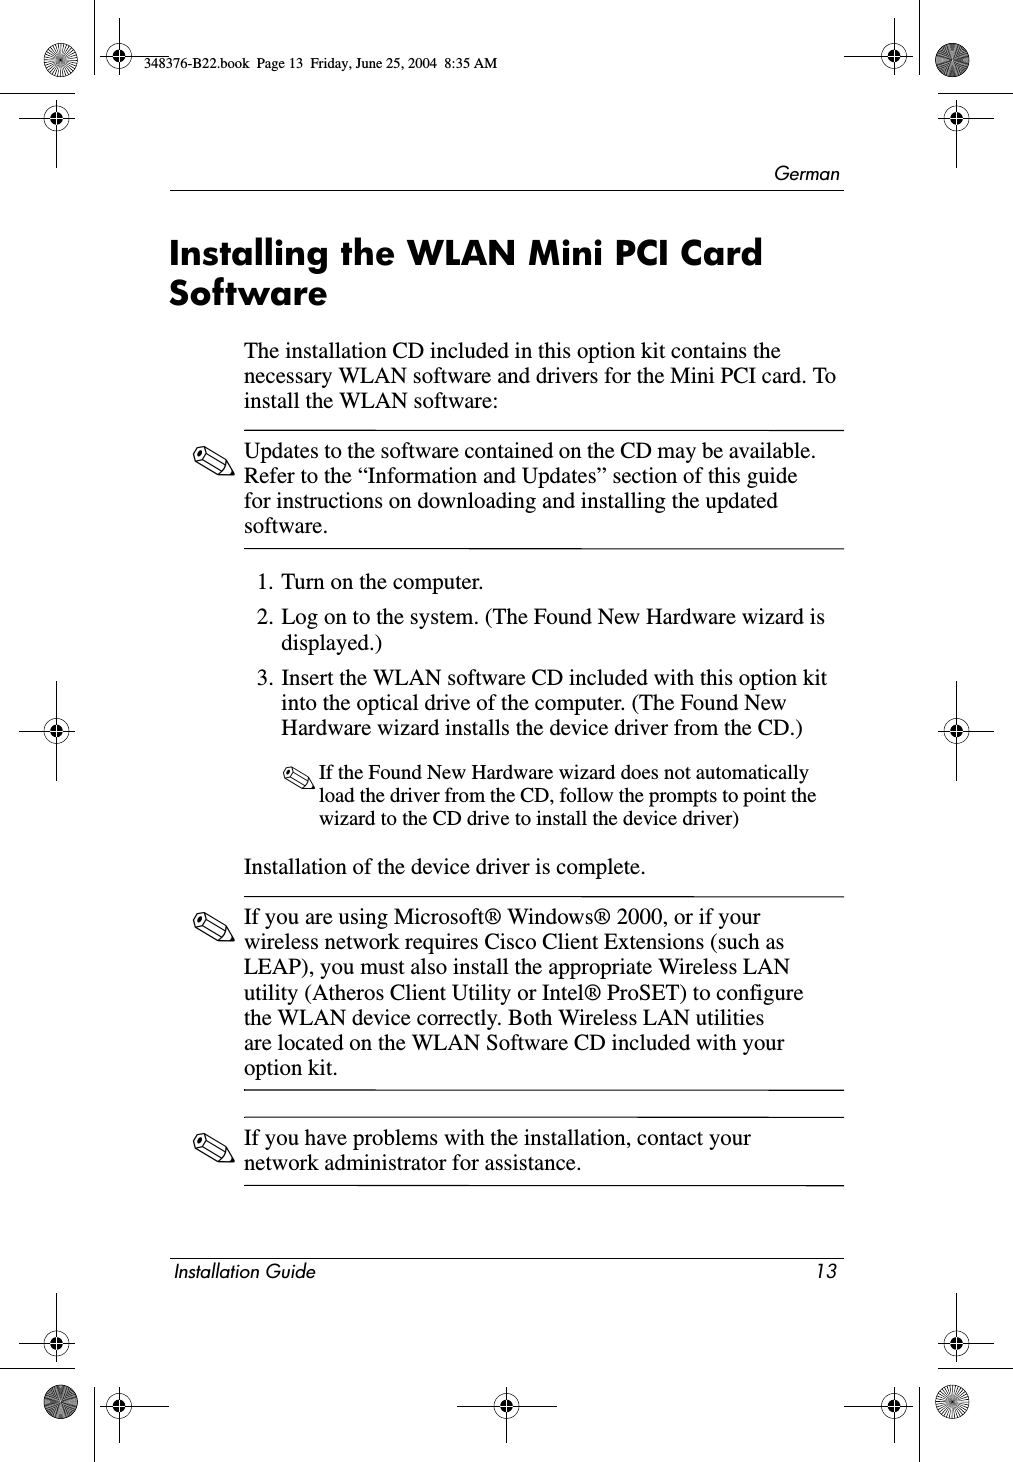 GermanInstallation Guide 13Installing the WLAN Mini PCI Card SoftwareThe installation CD included in this option kit contains the necessary WLAN software and drivers for the Mini PCI card. To install the WLAN software: ✎Updates to the software contained on the CD may be available. Refer to the “Information and Updates” section of this guide for instructions on downloading and installing the updated software.1. Turn on the computer.2. Log on to the system. (The Found New Hardware wizard is displayed.)3. Insert the WLAN software CD included with this option kit into the optical drive of the computer. (The Found New Hardware wizard installs the device driver from the CD.)✎If the Found New Hardware wizard does not automatically load the driver from the CD, follow the prompts to point the wizard to the CD drive to install the device driver)Installation of the device driver is complete.✎If you are using Microsoft® Windows® 2000, or if your wireless network requires Cisco Client Extensions (such as LEAP), you must also install the appropriate Wireless LAN utility (Atheros Client Utility or Intel® ProSET) to configure the WLAN device correctly. Both Wireless LAN utilities are located on the WLAN Software CD included with your option kit. ✎If you have problems with the installation, contact your network administrator for assistance.348376-B22.book  Page 13  Friday, June 25, 2004  8:35 AM